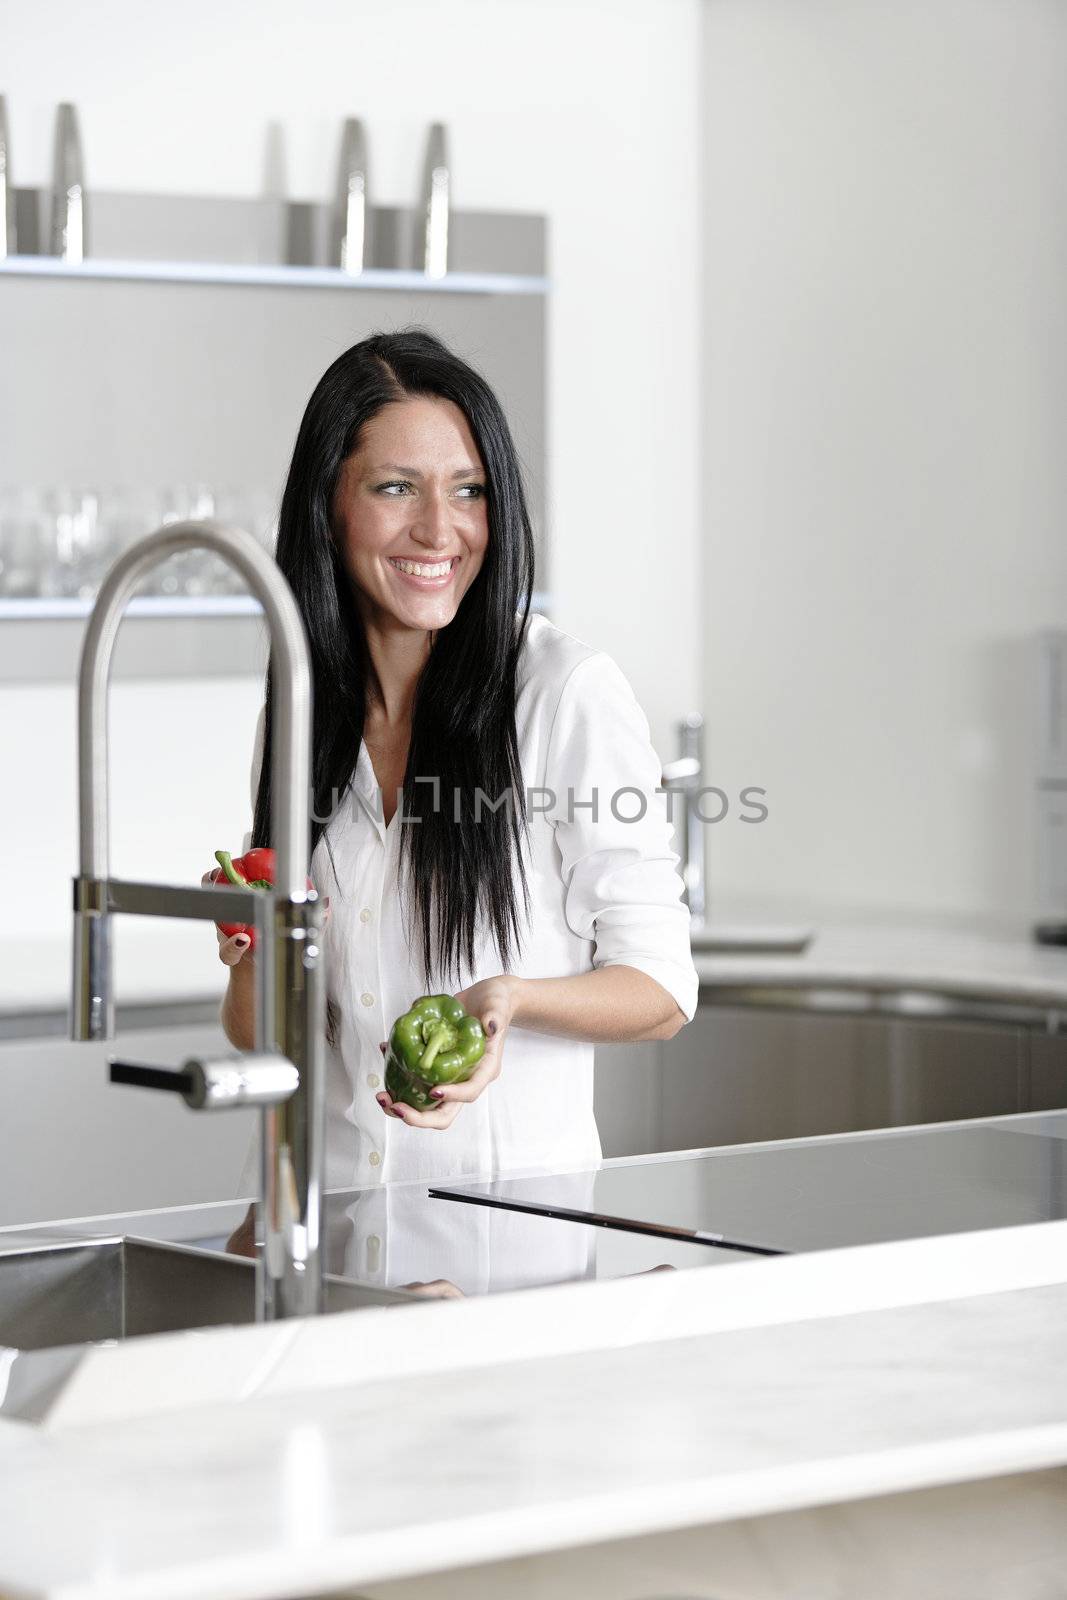 Beautiful young woman preparing food in her modern kitchen at home